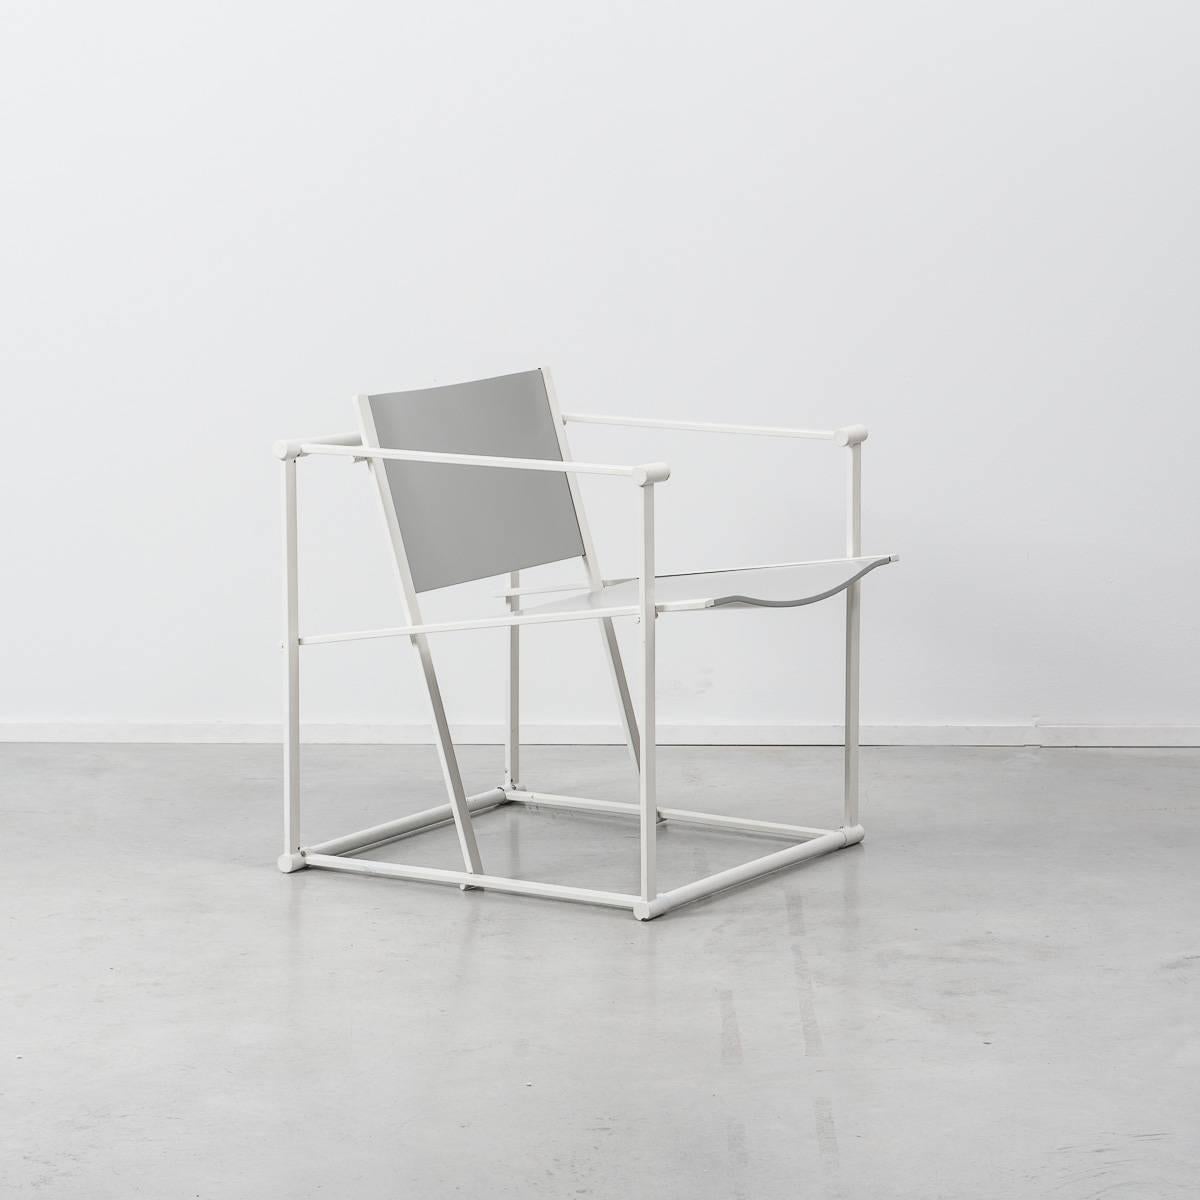 This FM60 chair was designed by Radboud Van Beekum and manufactured by UMS Pastoe. It has a white folded metal frame with grey plywood seating. Following in the tradition of the De Stijl movement, the FM60 series is inspired by the designs of Gerrit